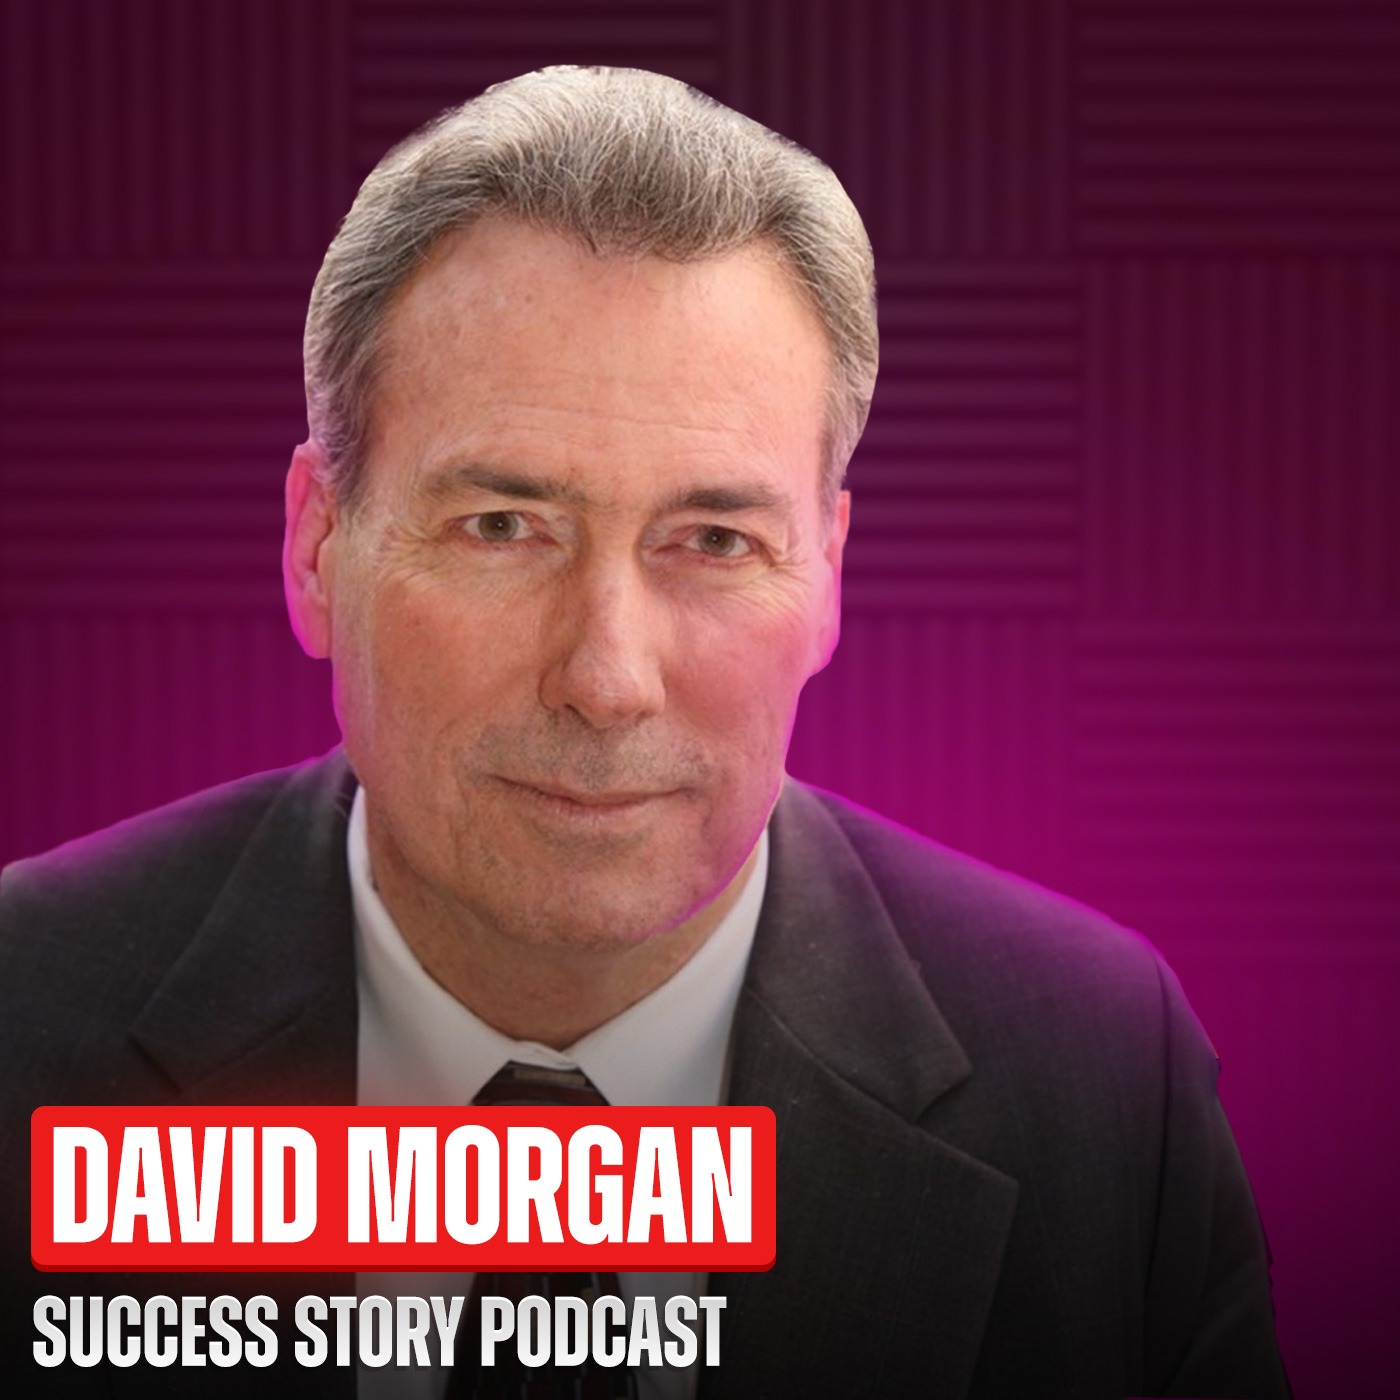 Lessons - How Excessive Money Printing Can Backfire | David Morgan - Founder of the Morgan Report